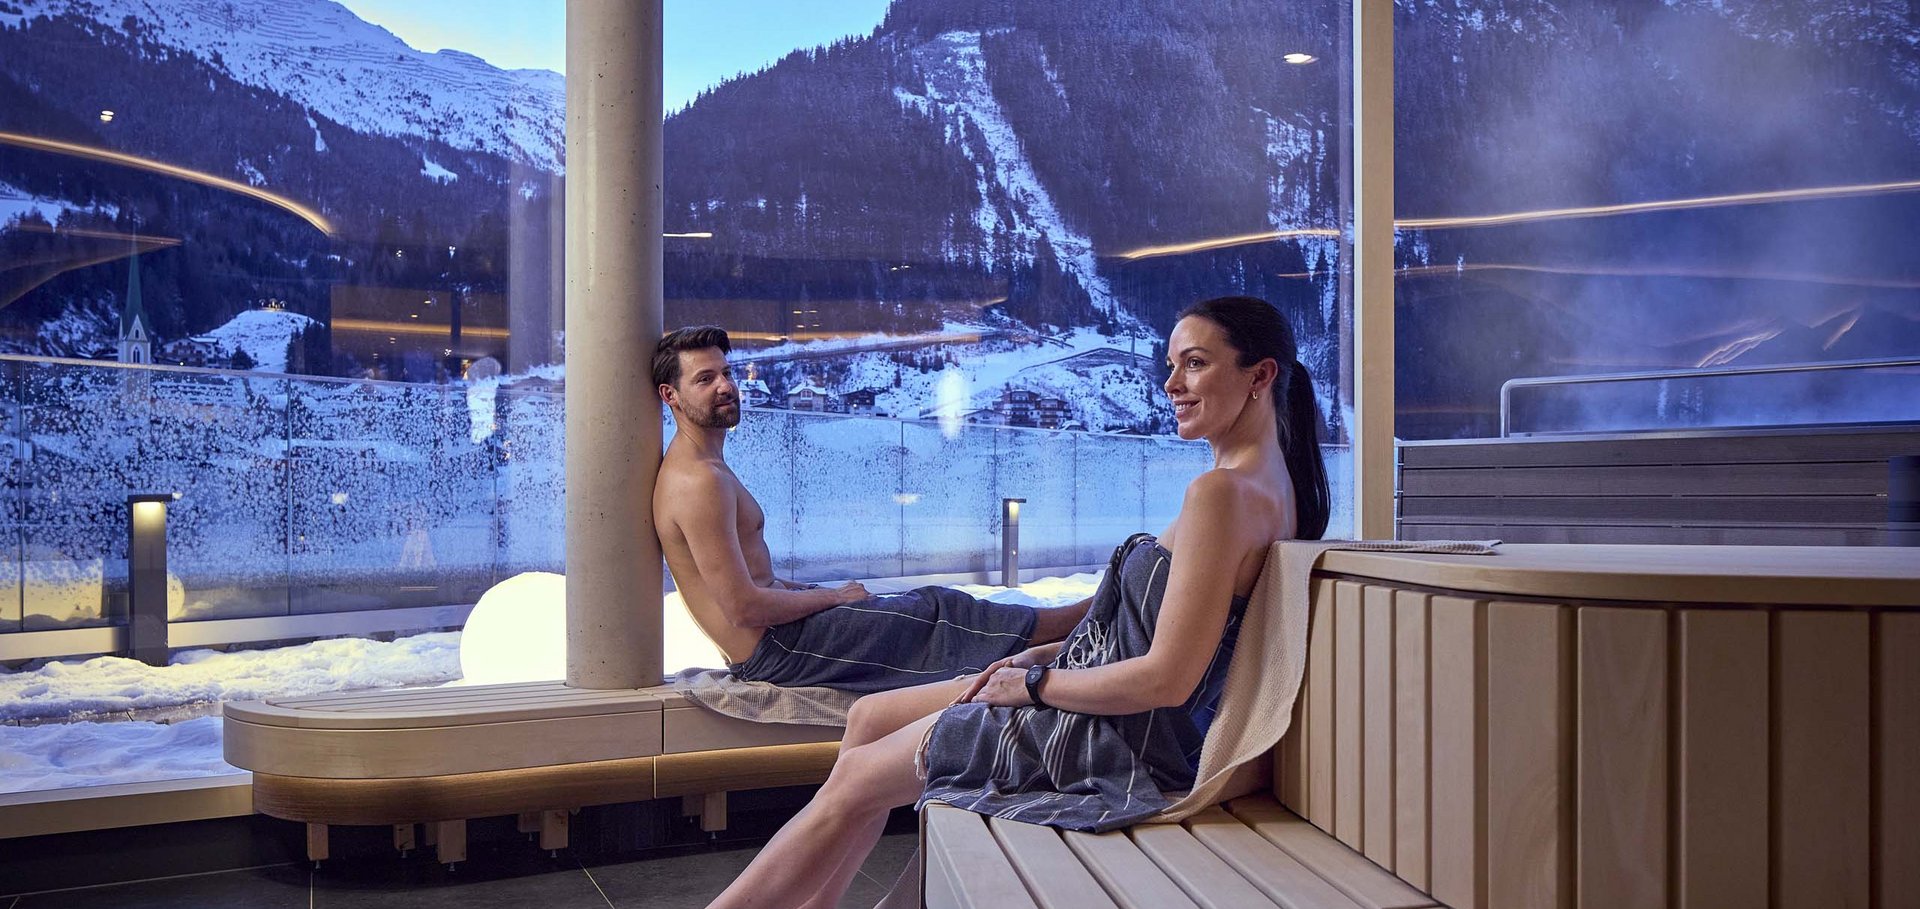 Silvretta Therme in Ischgl: spa and sports wrapped into one